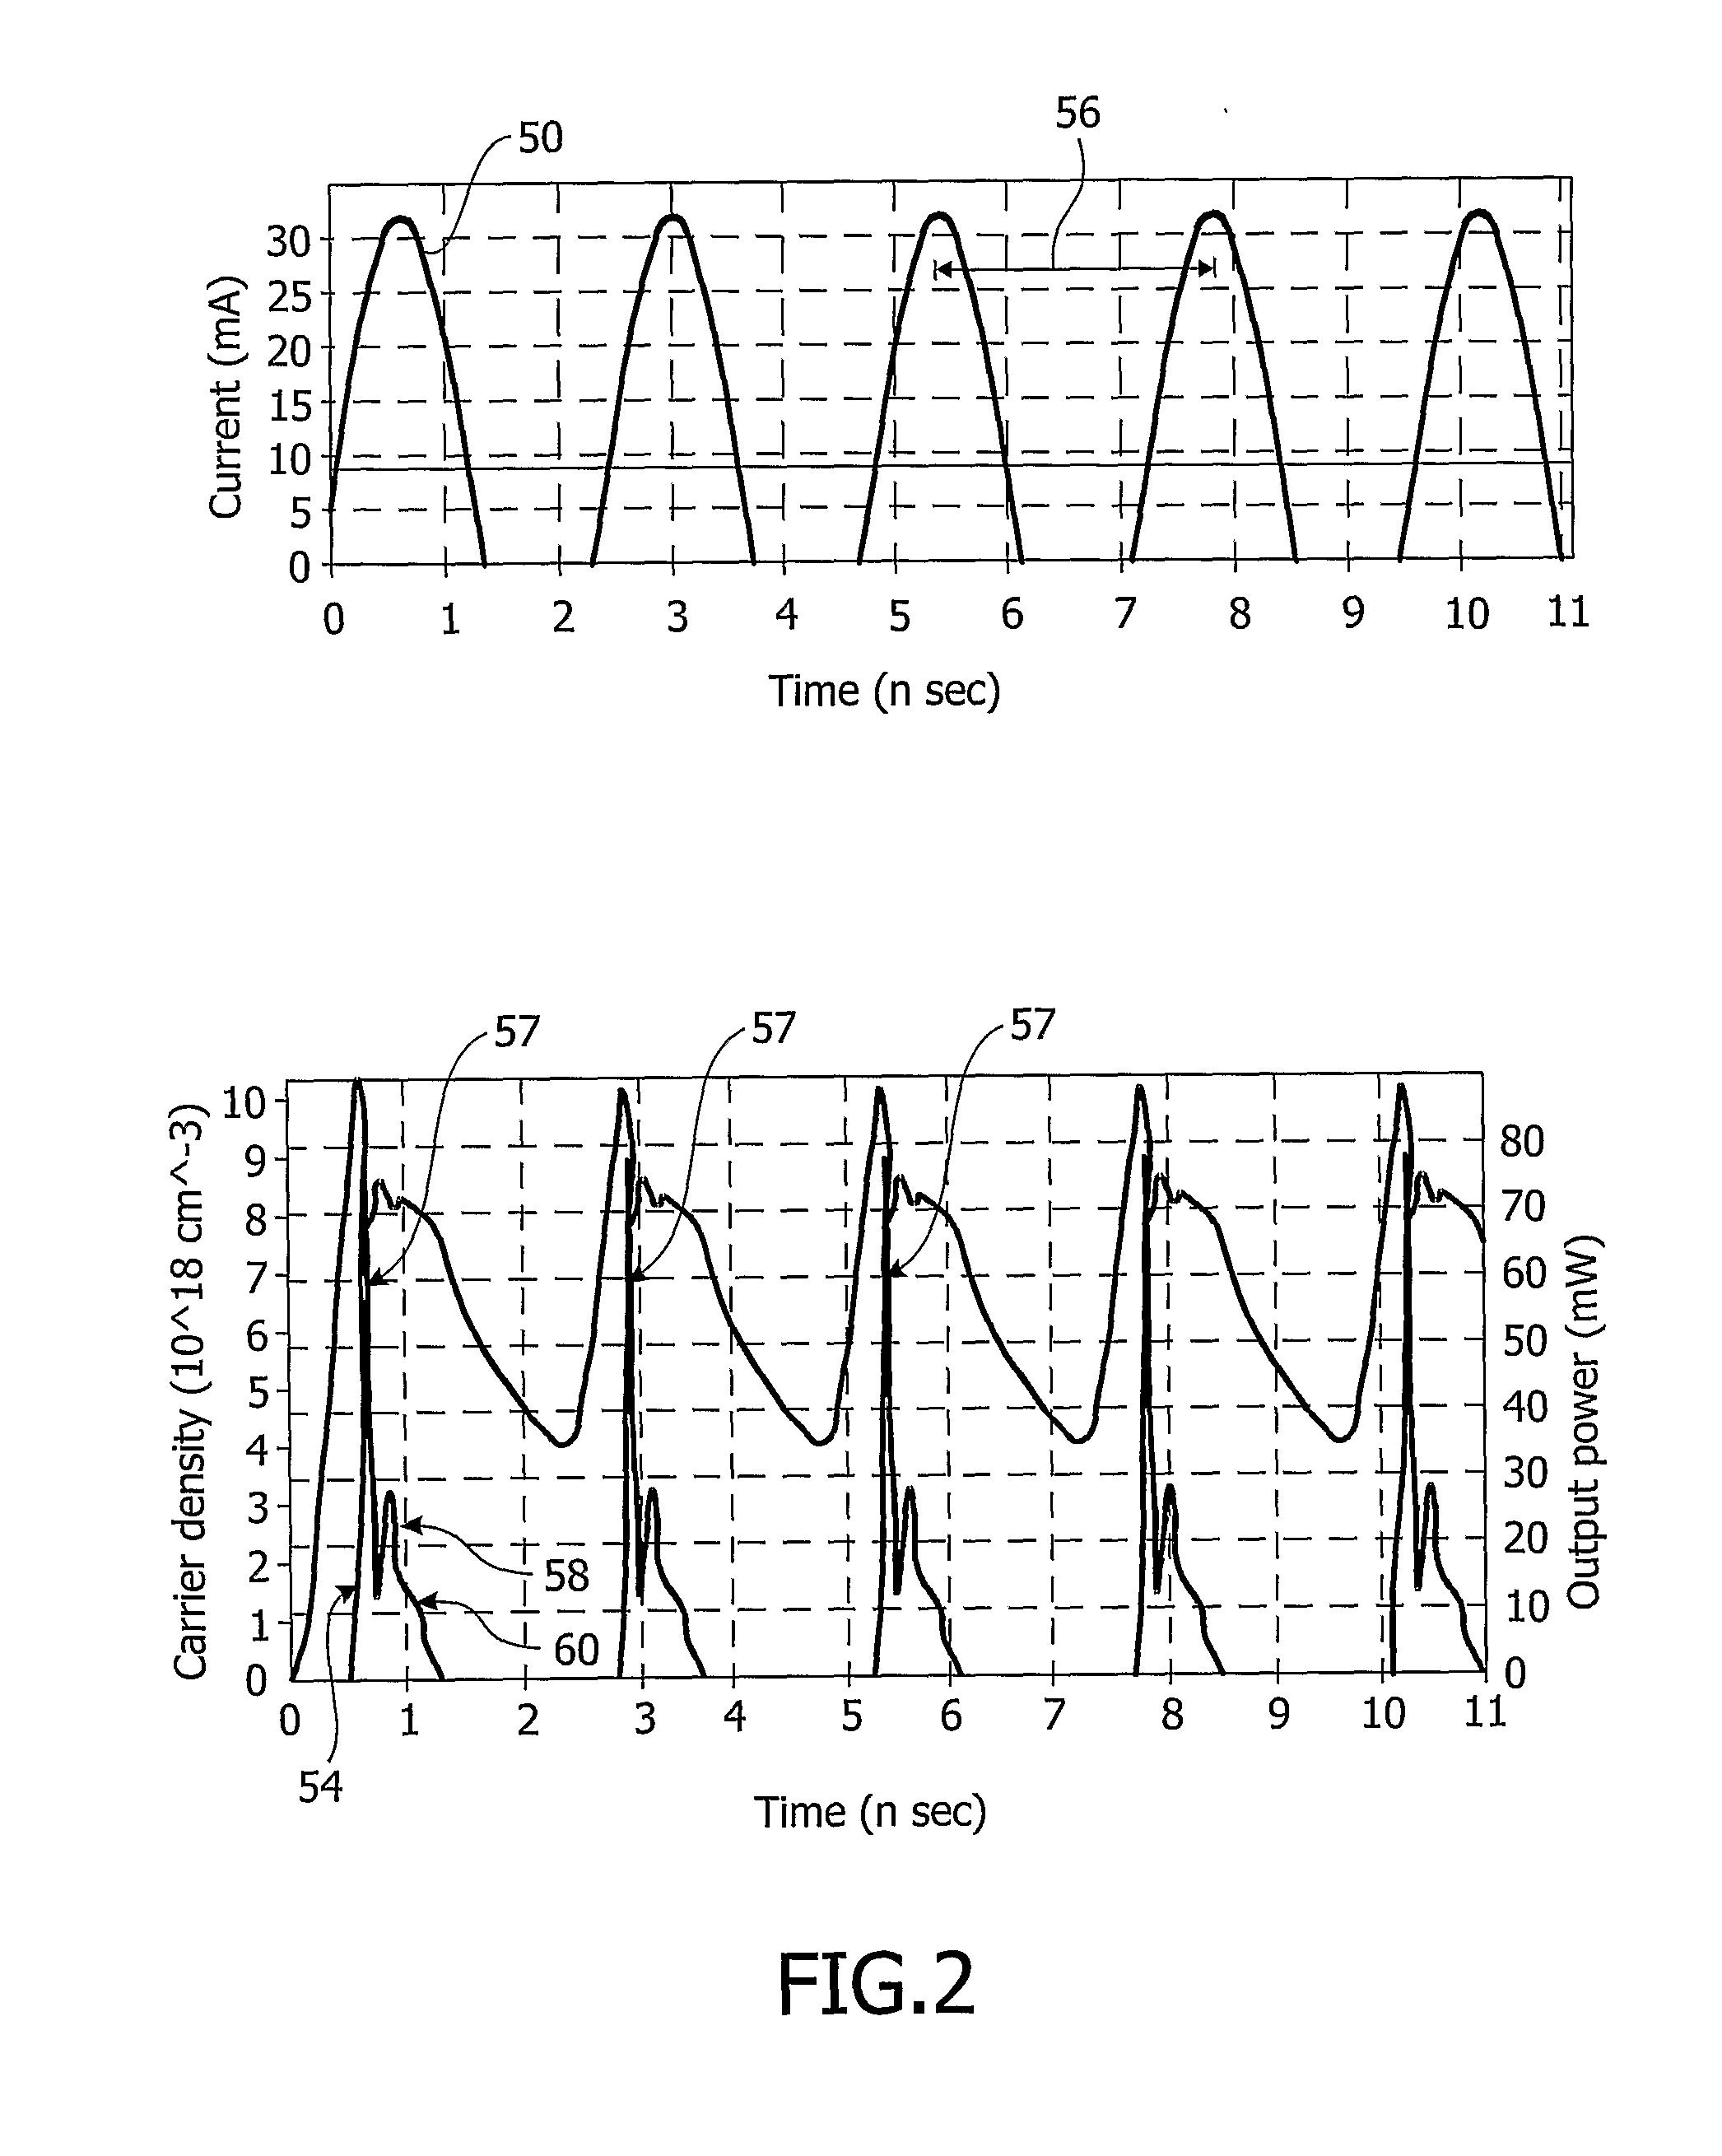 System For Reducing Feedback Noise Due to Relaxation Oscillation in Optical Data Recording Reproducing Systems Using Optimized External Cavity